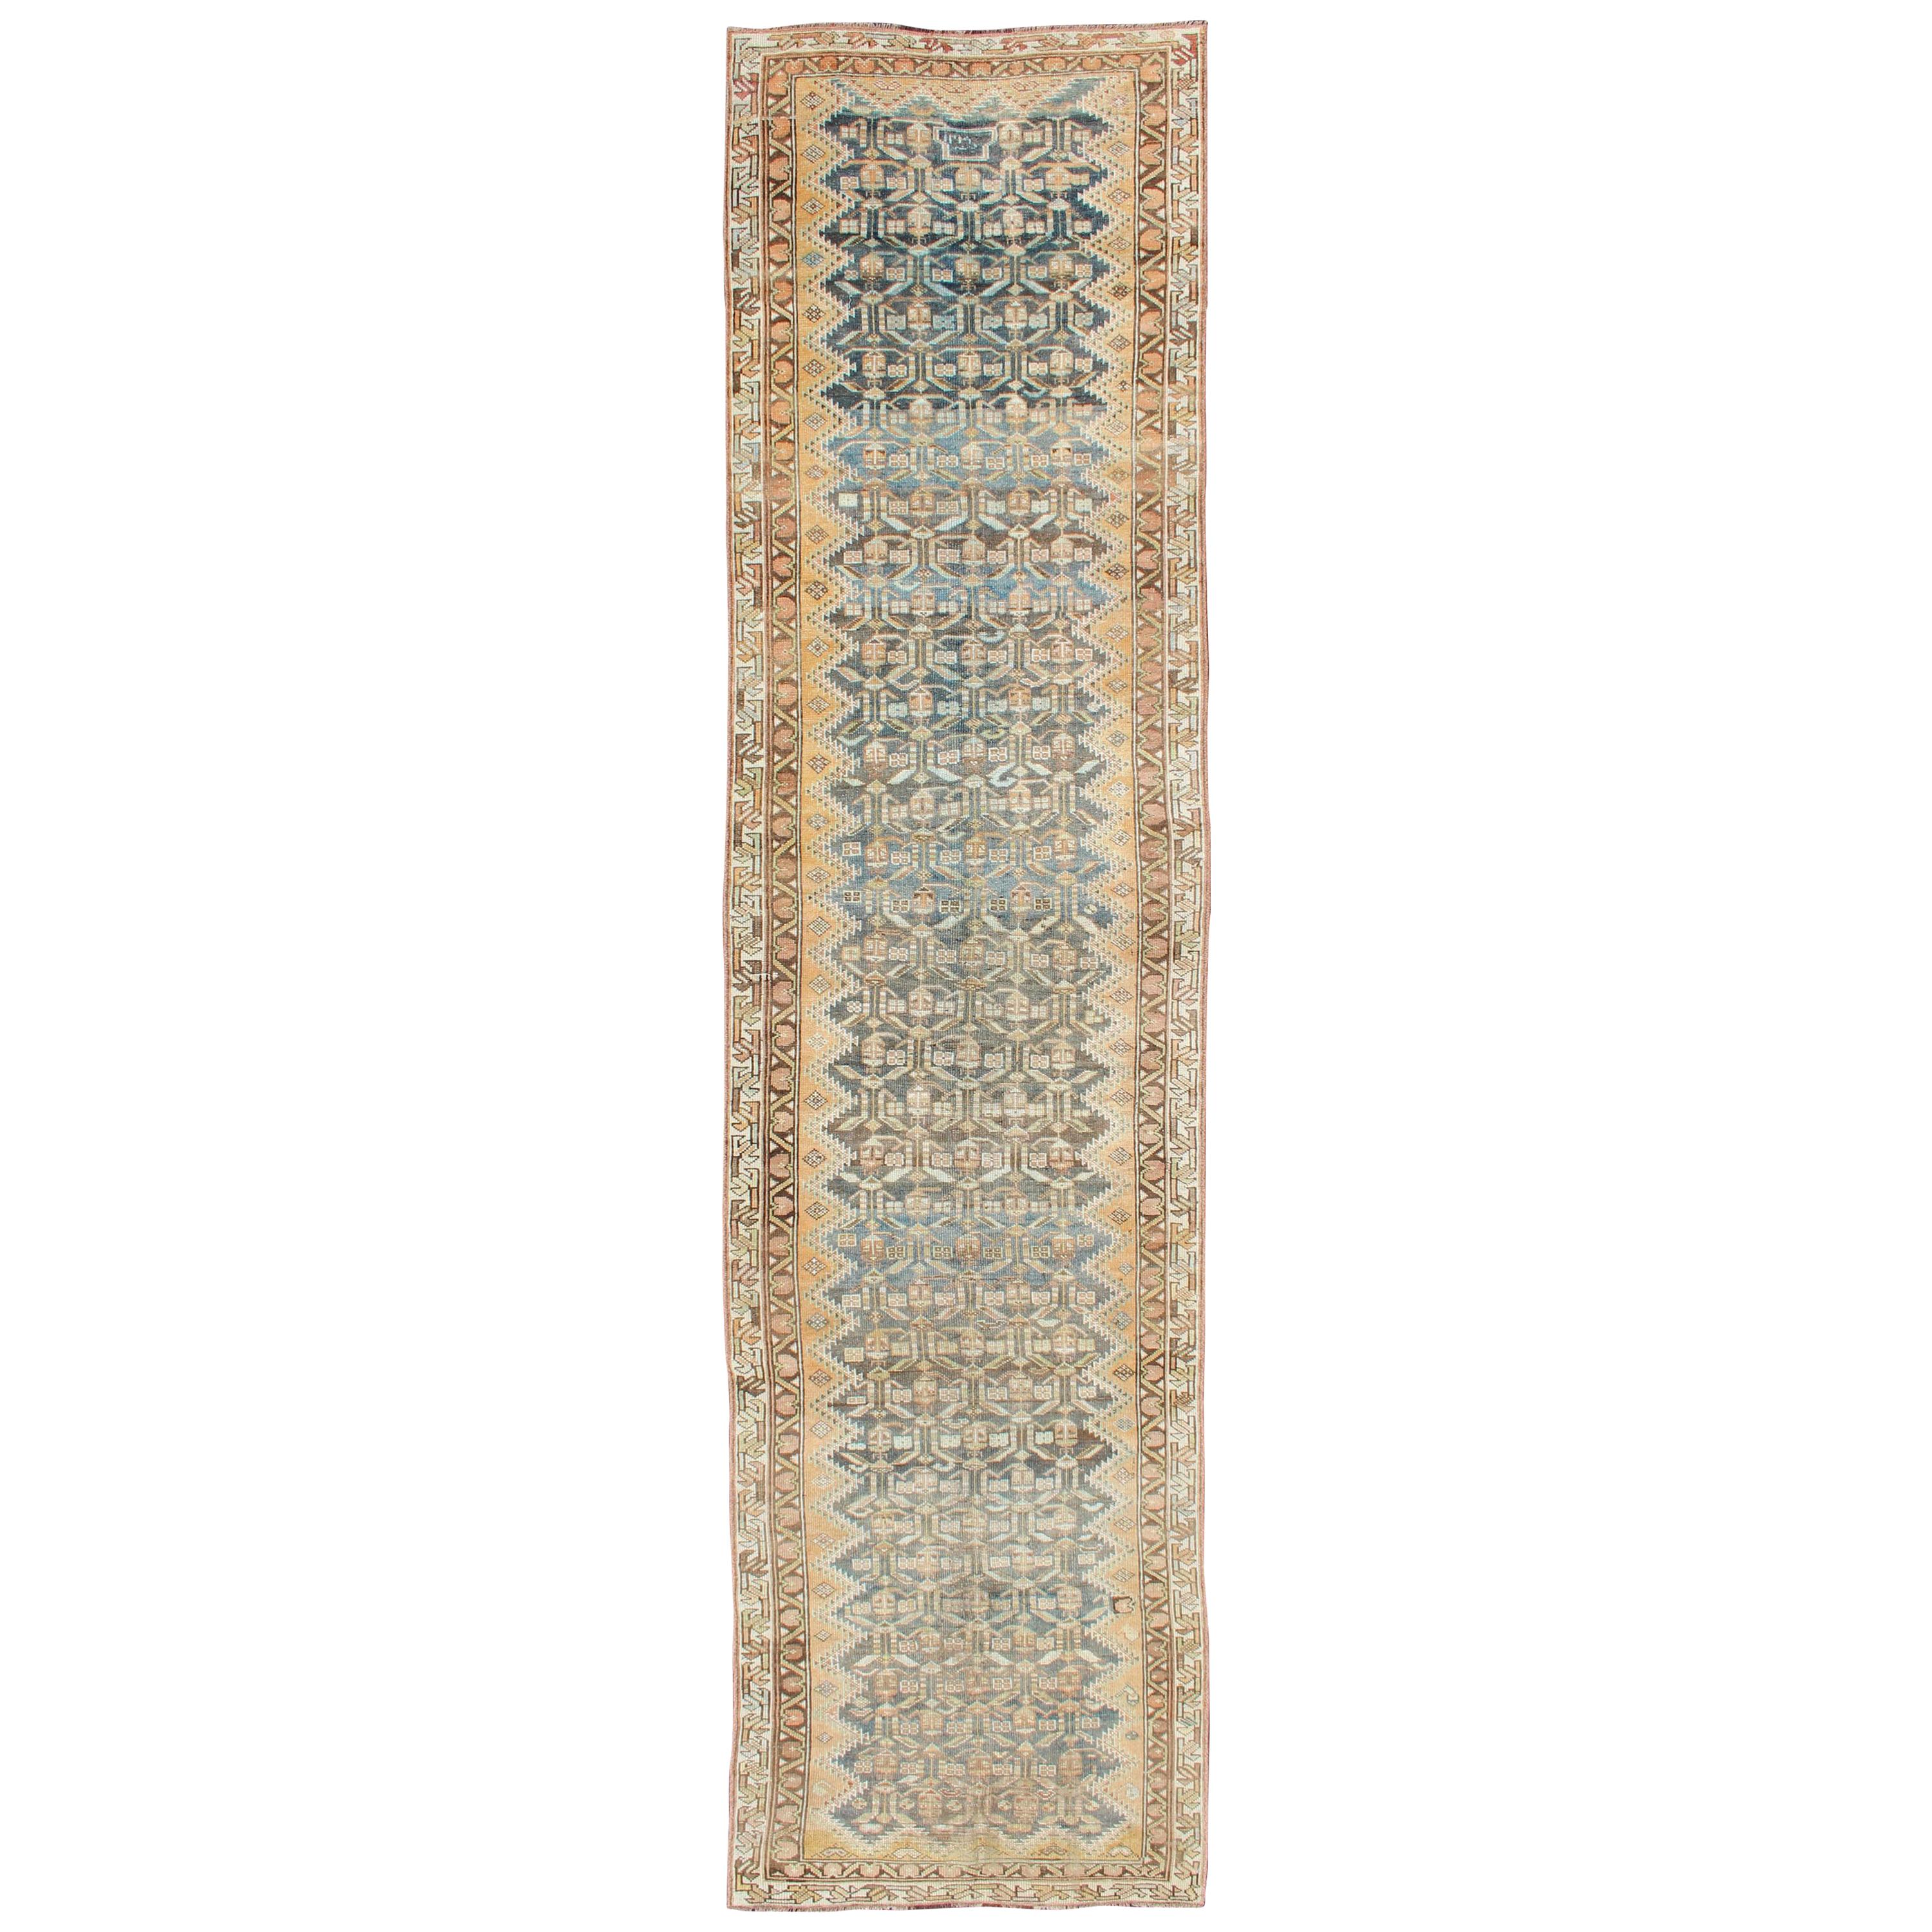 Antique Persian Malayer Runner with Teal, Gray, Blue & Brown in Geometric Design